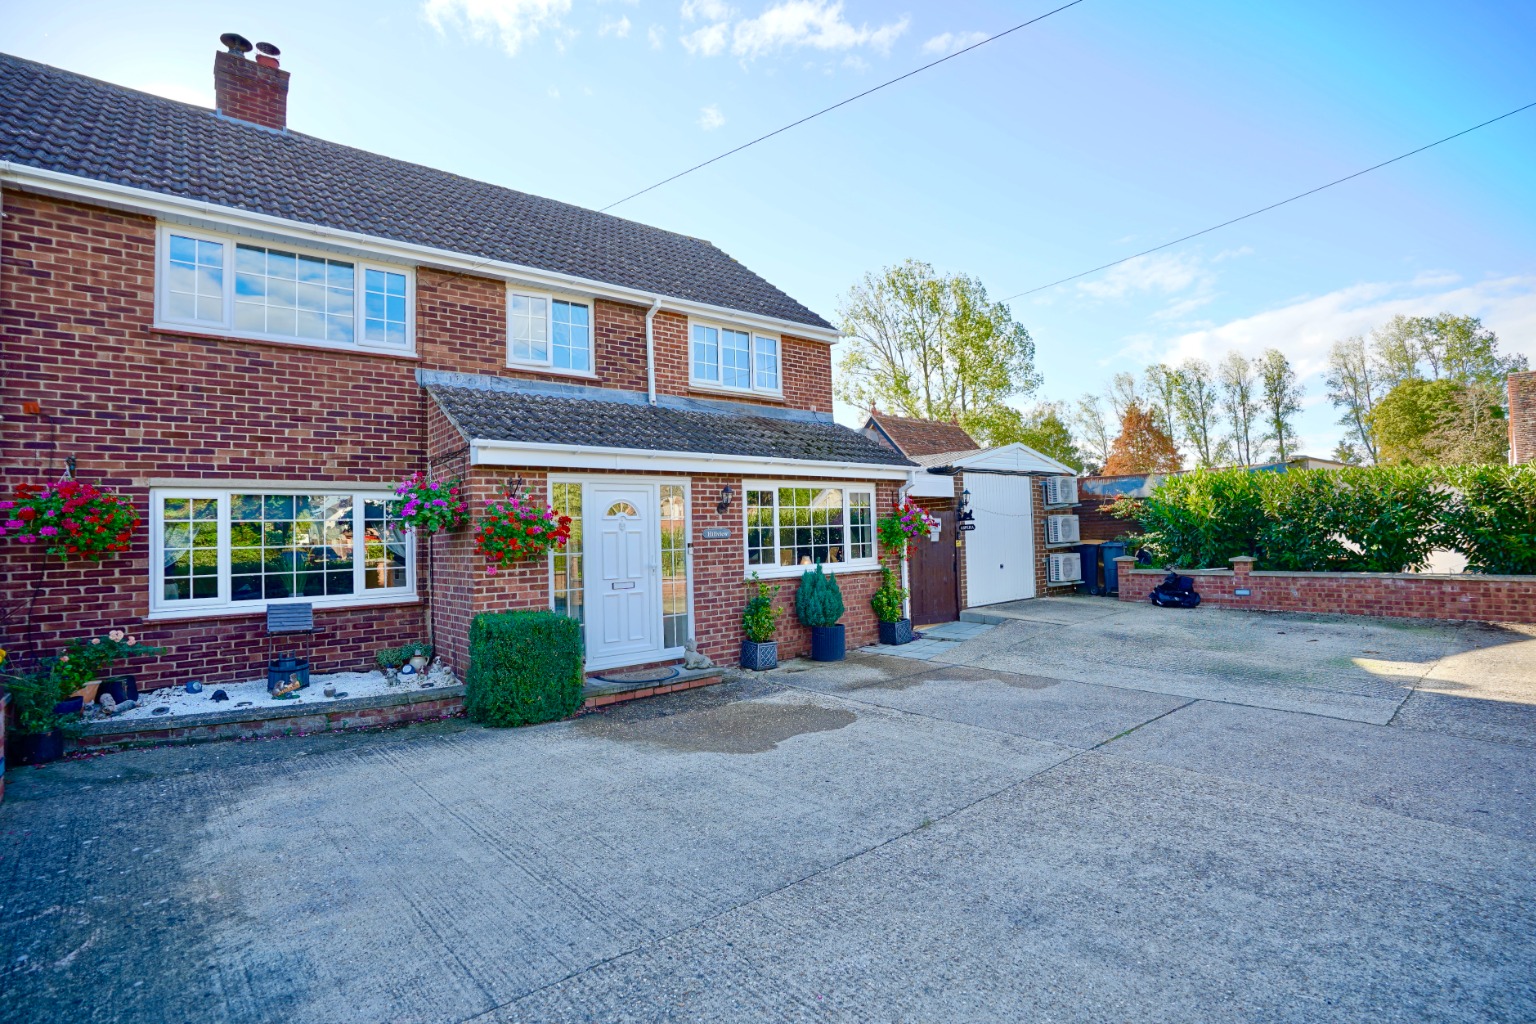 4 bed semi-detached house for sale in Church Road, Bedford  - Property Image 1